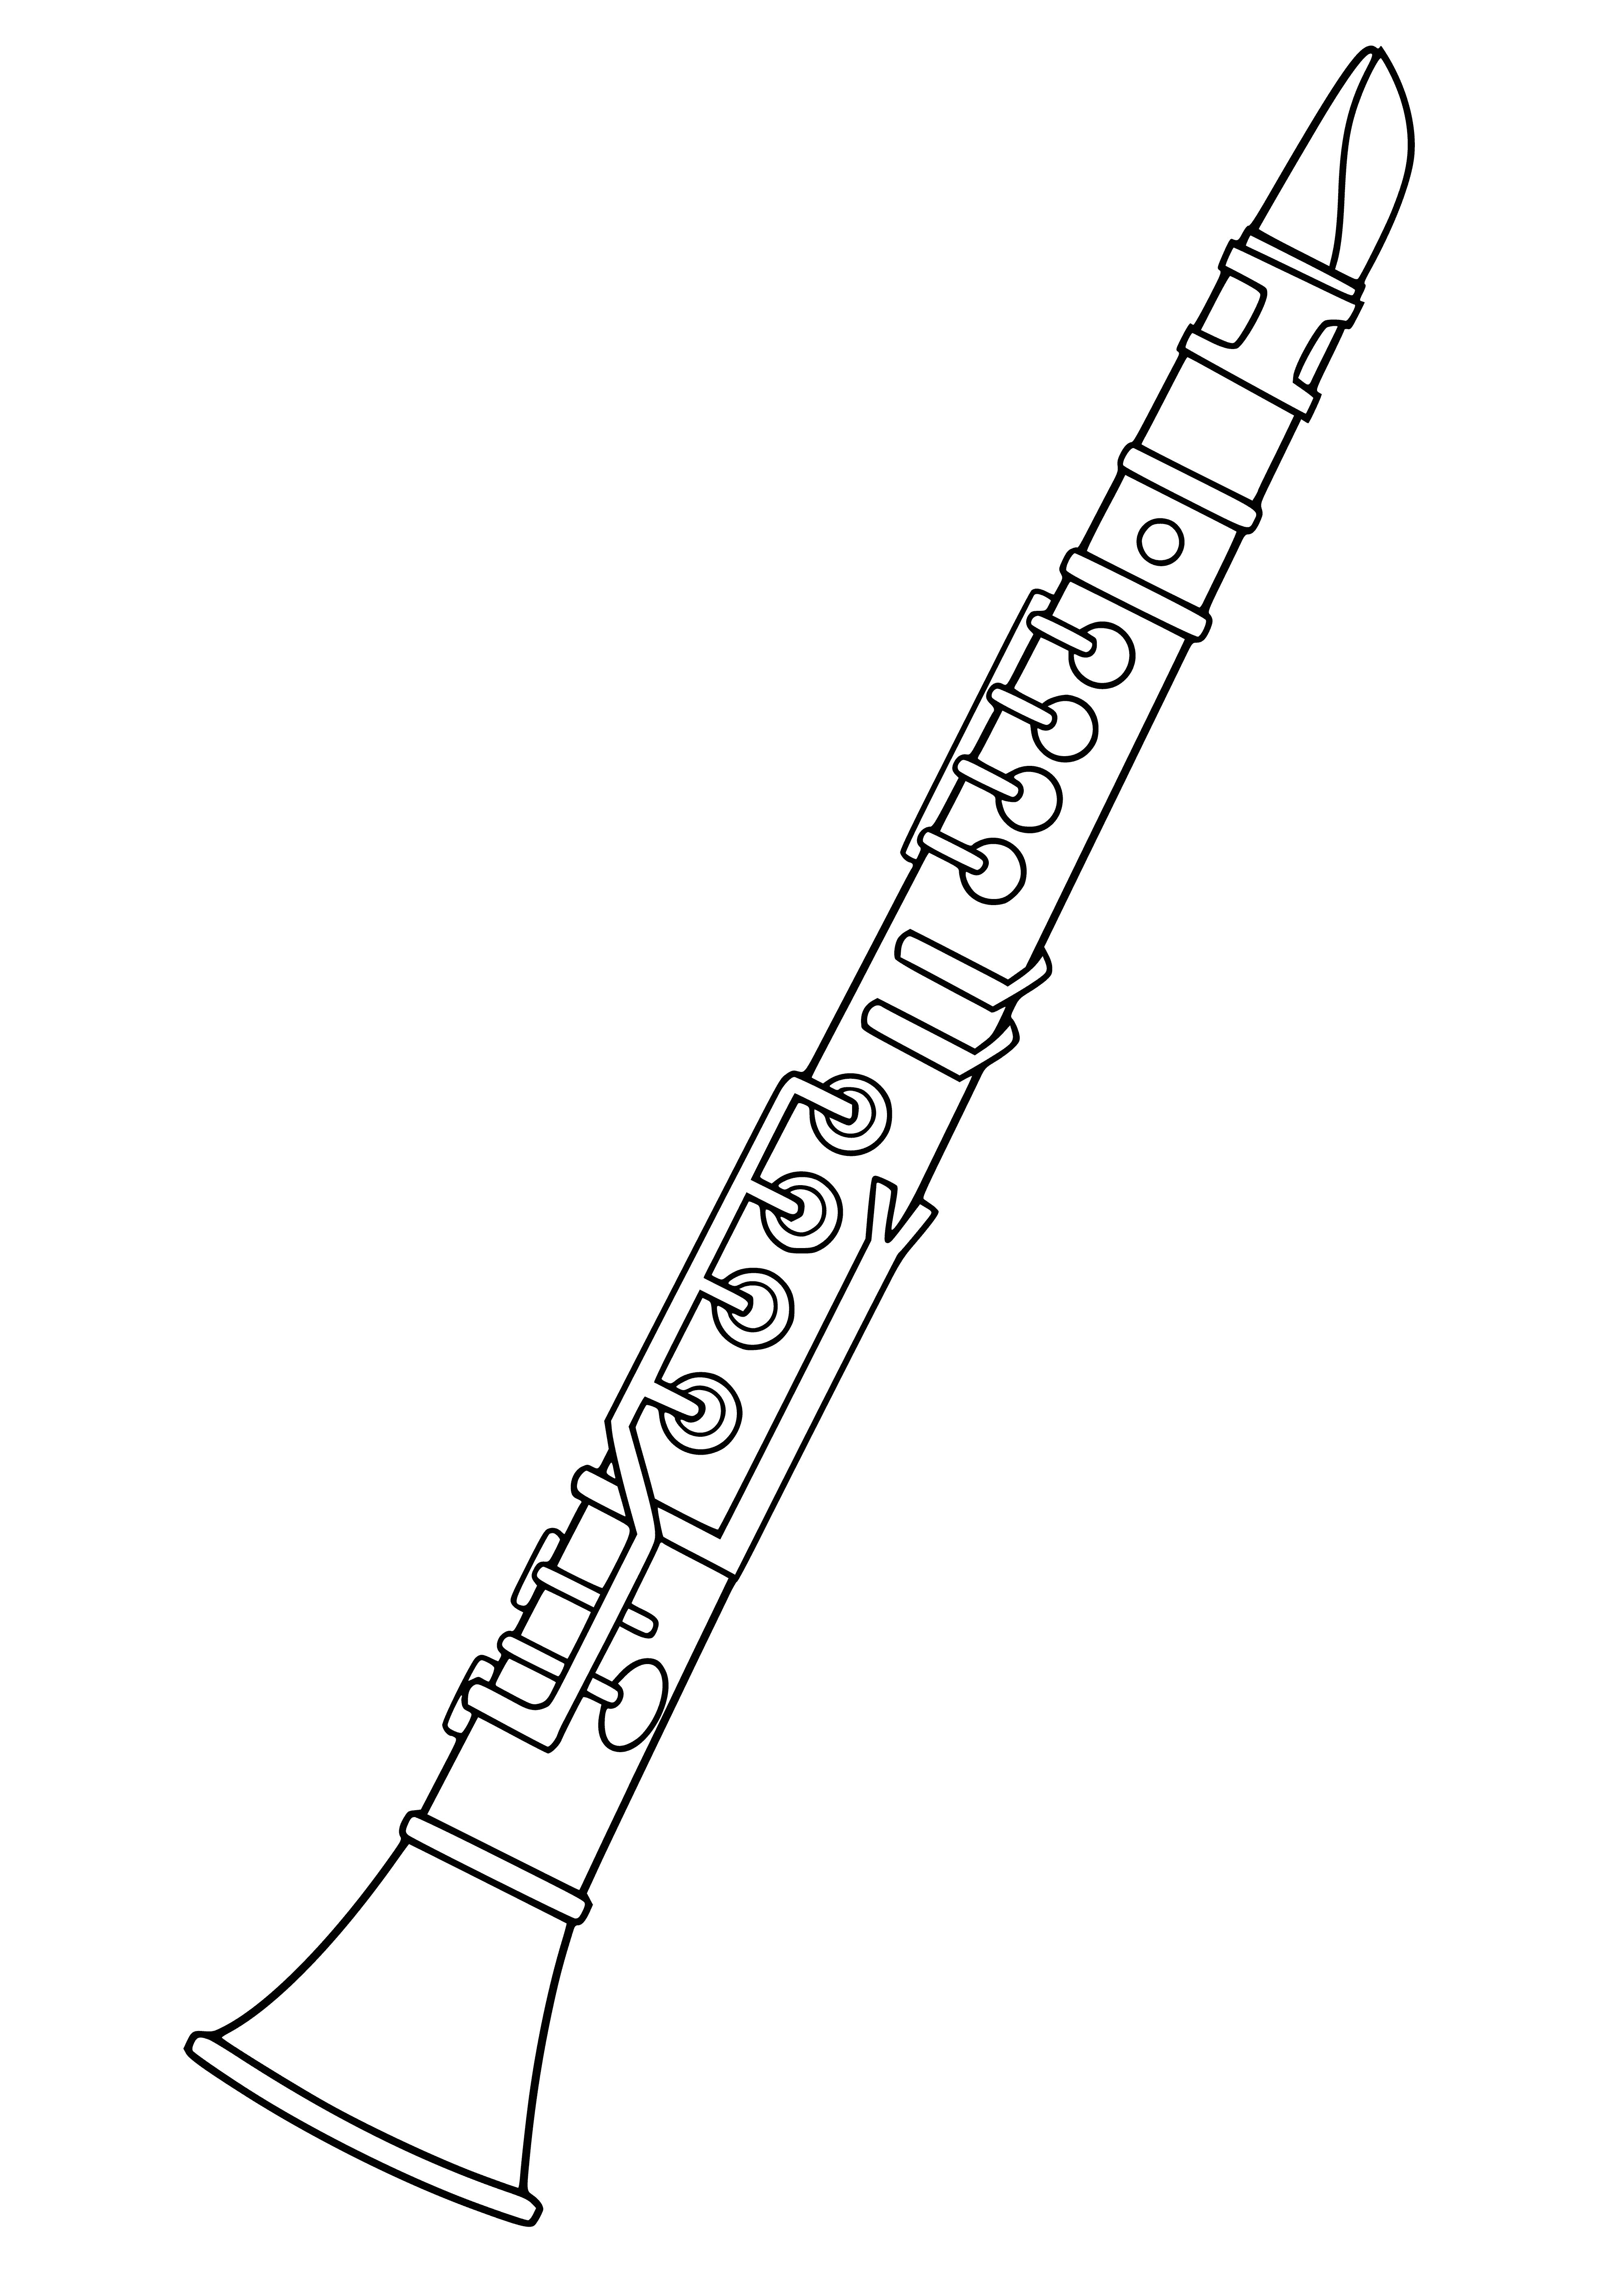 coloring page: Clarinet is a woodwind instrument with a range of 3.5 octaves, common in jazz, classical, & wind ensembles. Has a cylindrical body with a flared bell.